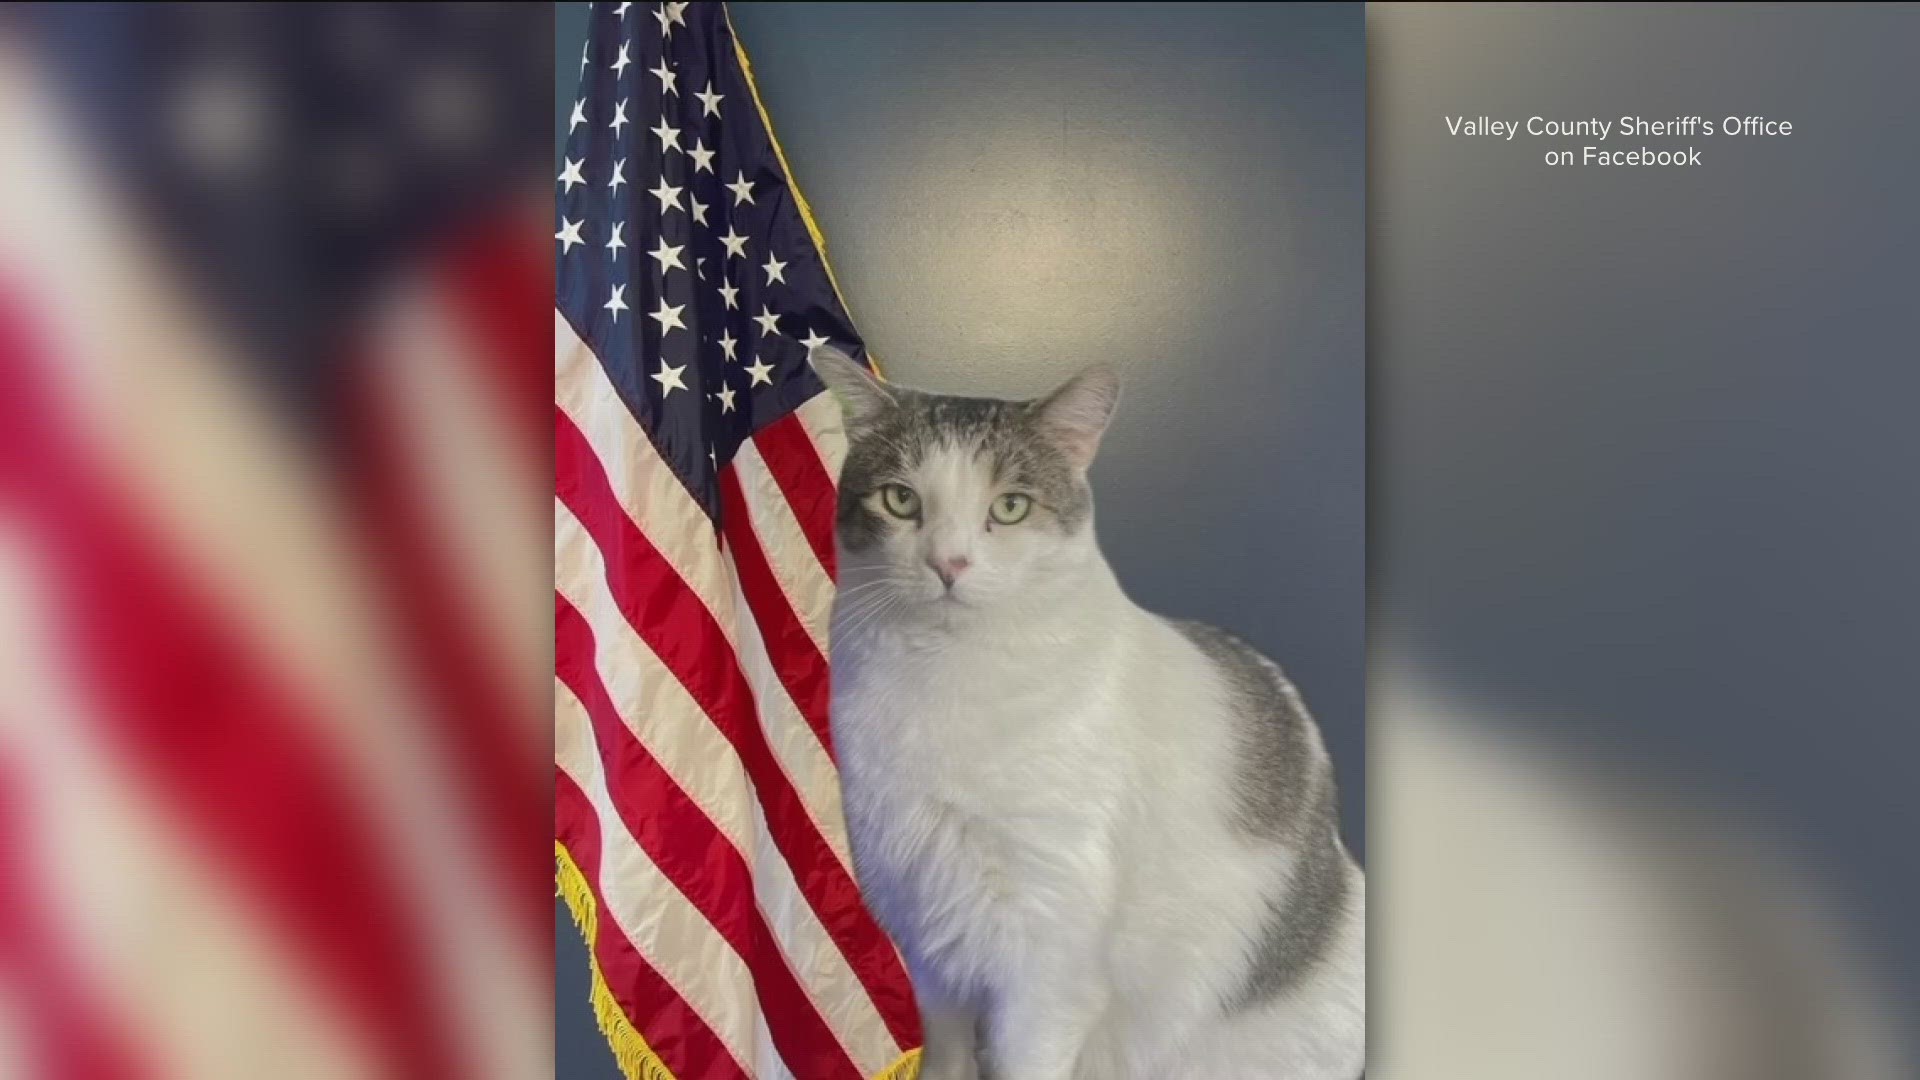 Dep. Chunky Monkey has served in the county for one year, so he's just scratching the surface. The office said he has a craving for belly rubs, snacks and catnip.